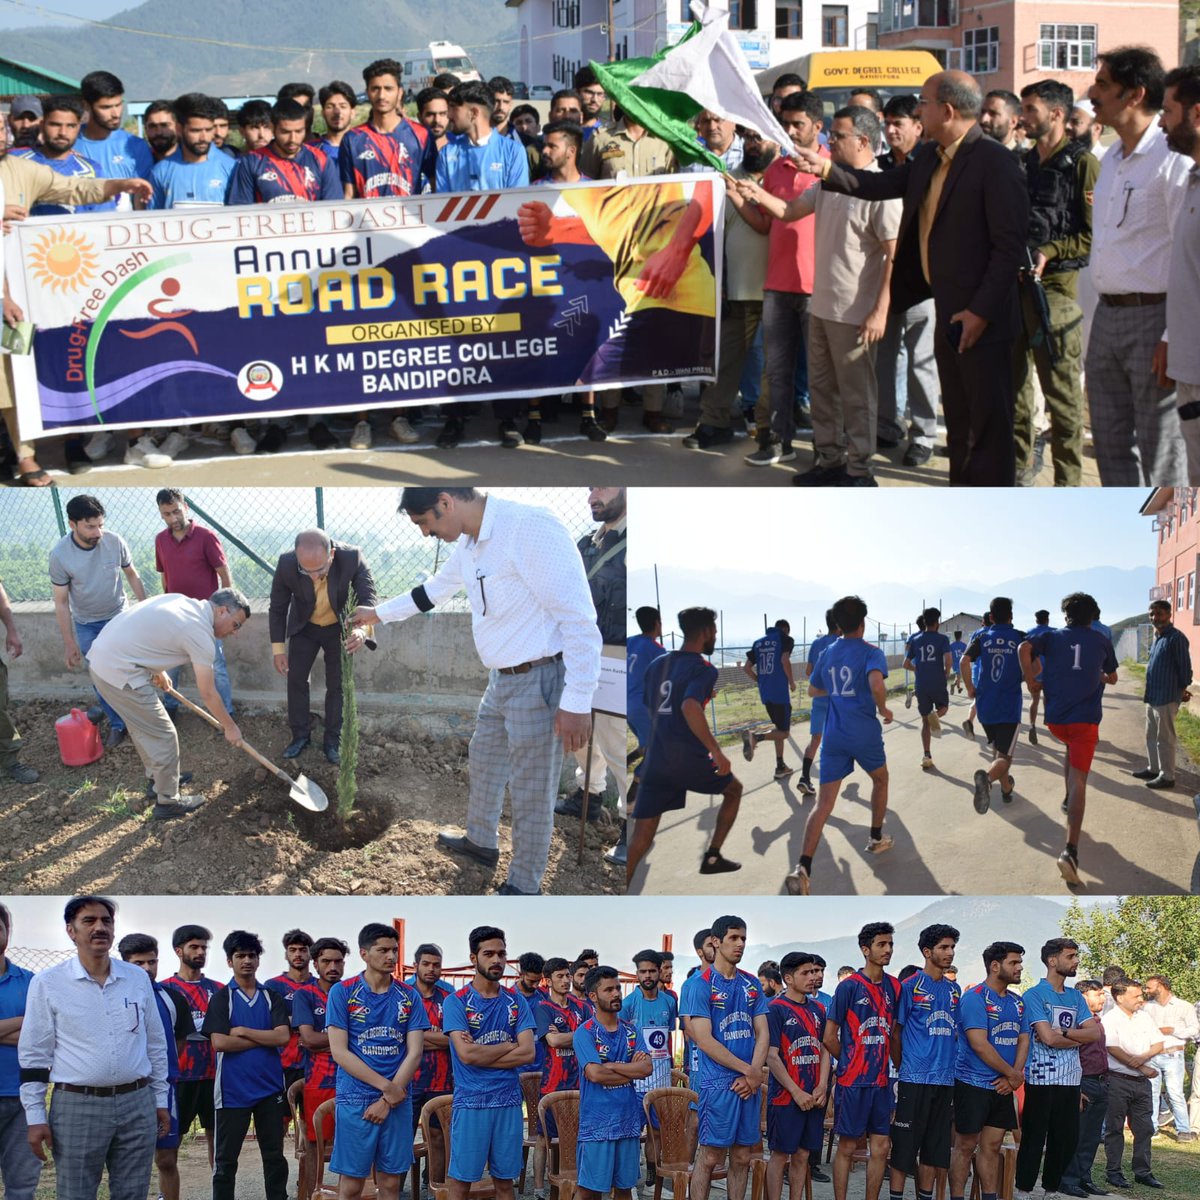 Drug-Free Desh: DC #Bandipora Shakeel ul Rehman flags of Annual Road Race 🏁 from HKM GDC #Bandipora. Emphasized students to participate in sporting activities and adopt a healthy lifestyle. @diprjk @ddnewsSrinagar @dicbandipora